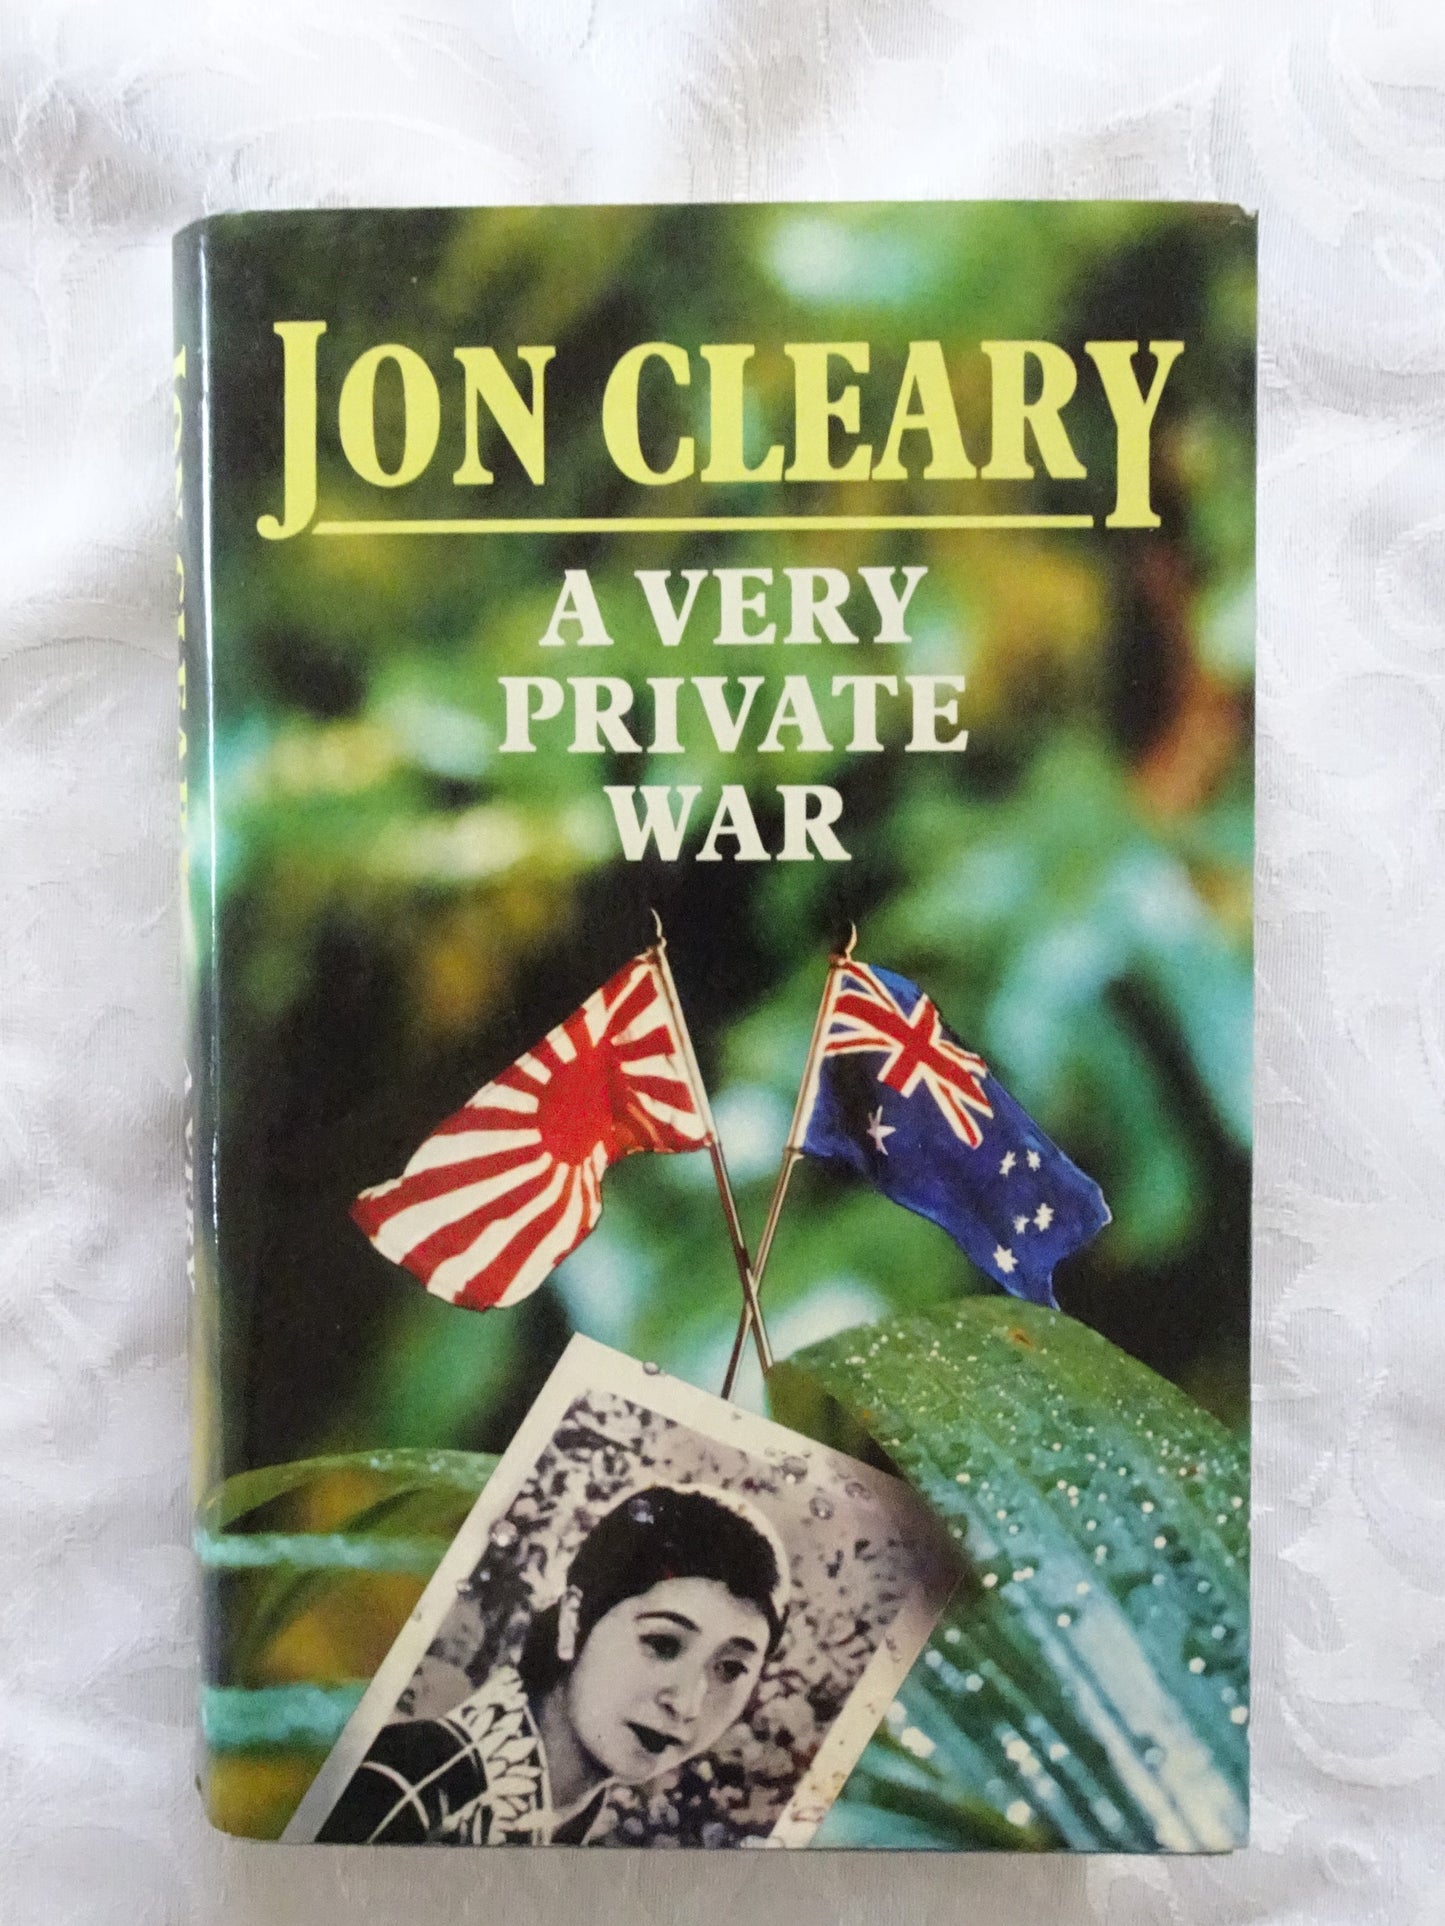 A Very Private War by Jon Cleary